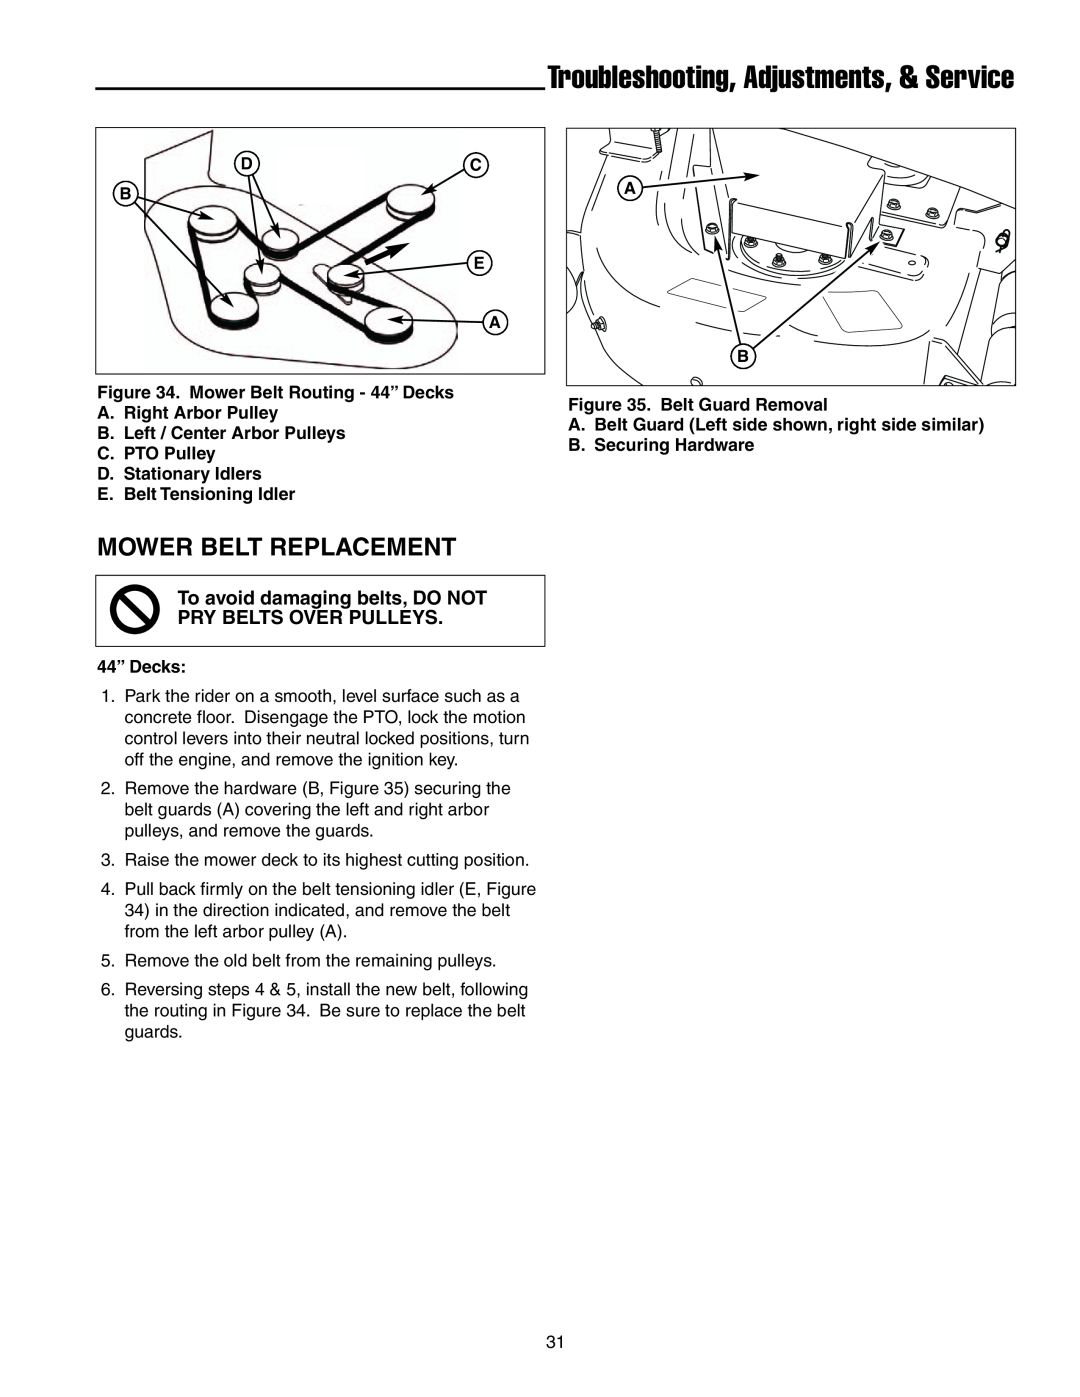 Snapper ERZT20441BVE2 manual Mower Belt Replacement, Troubleshooting, Adjustments, & Service 